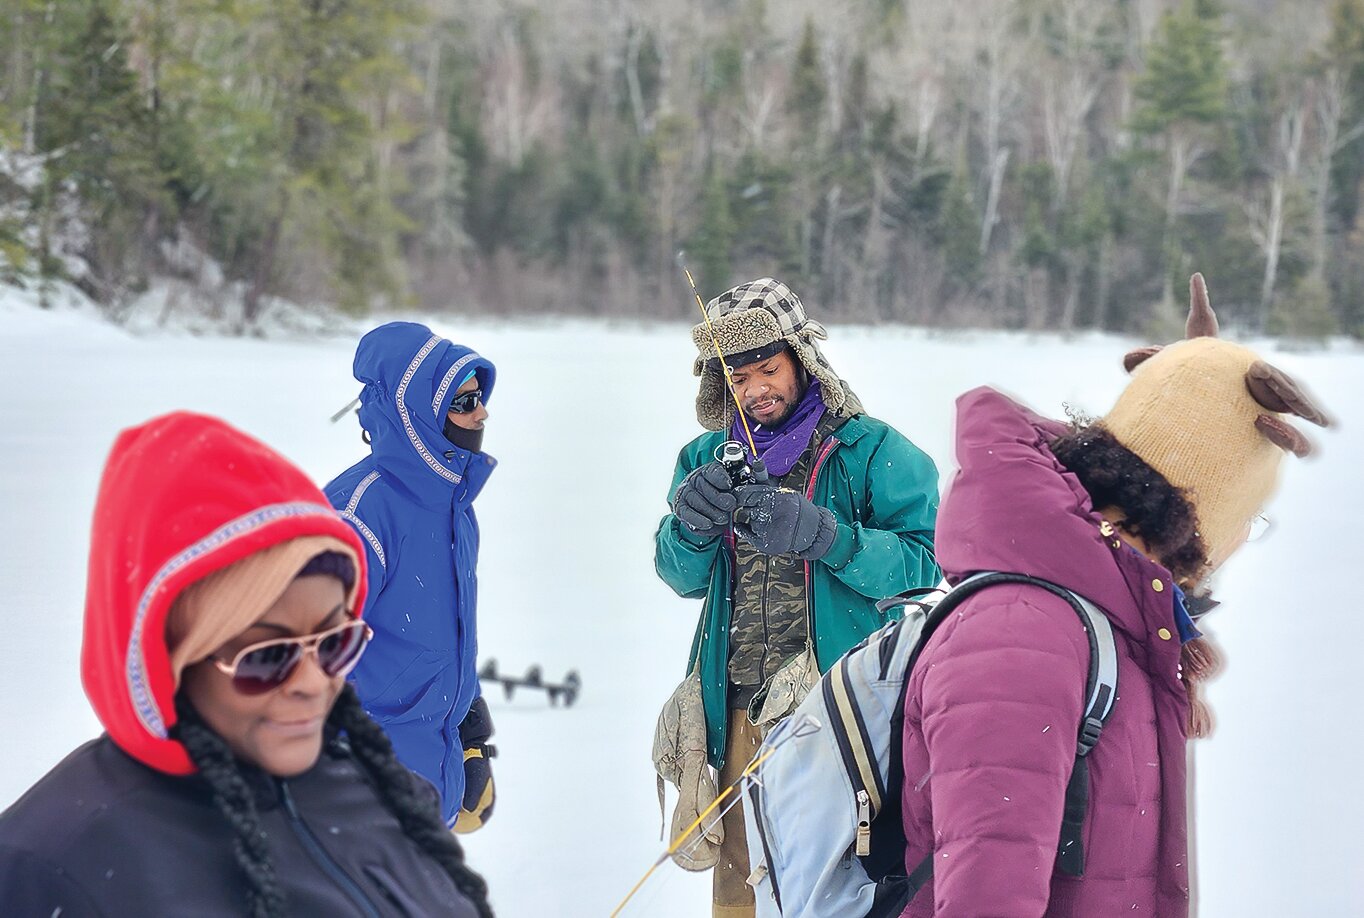 Kesley Ebbs (center) prepares an ice-fishing pole for one of the participants in this past winter’s outdoor experience made possible by Ebbs’ new 
outdoor adventure organization.